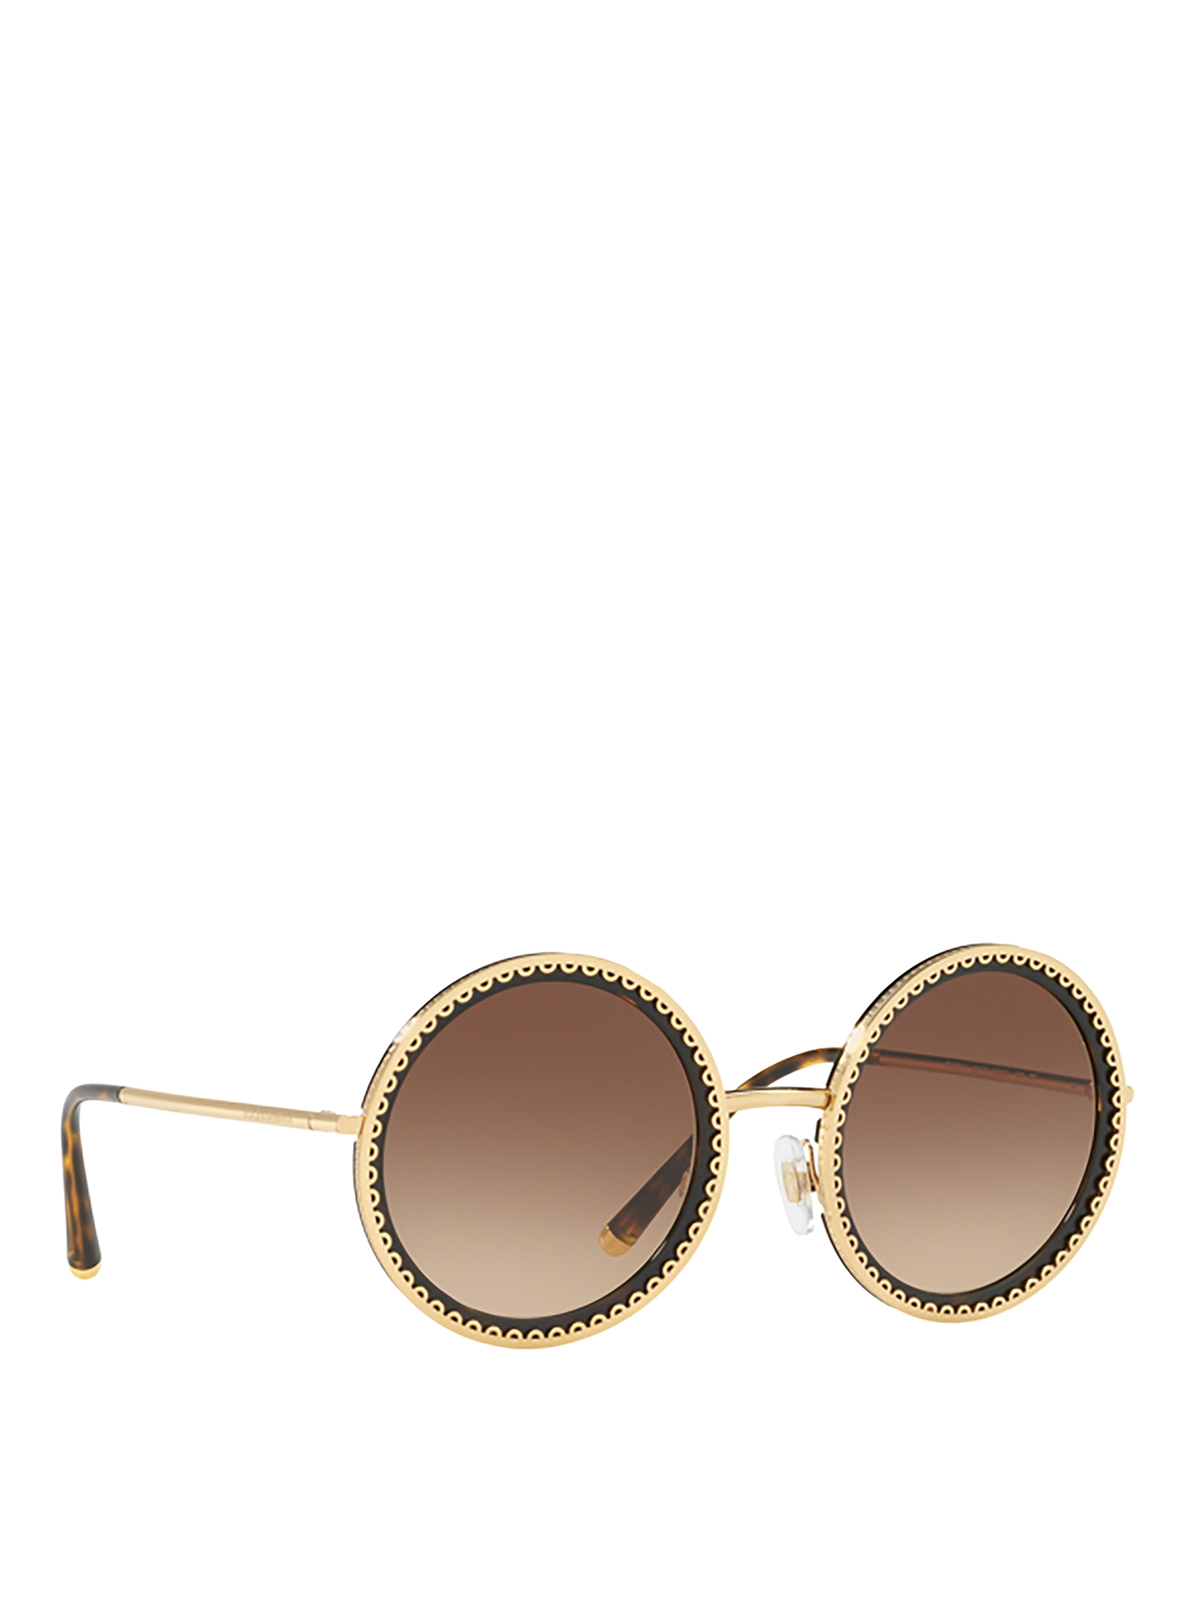 DOLCE & GABBANA EMBROIDERY EFFECT ROUND SUNGLASSES